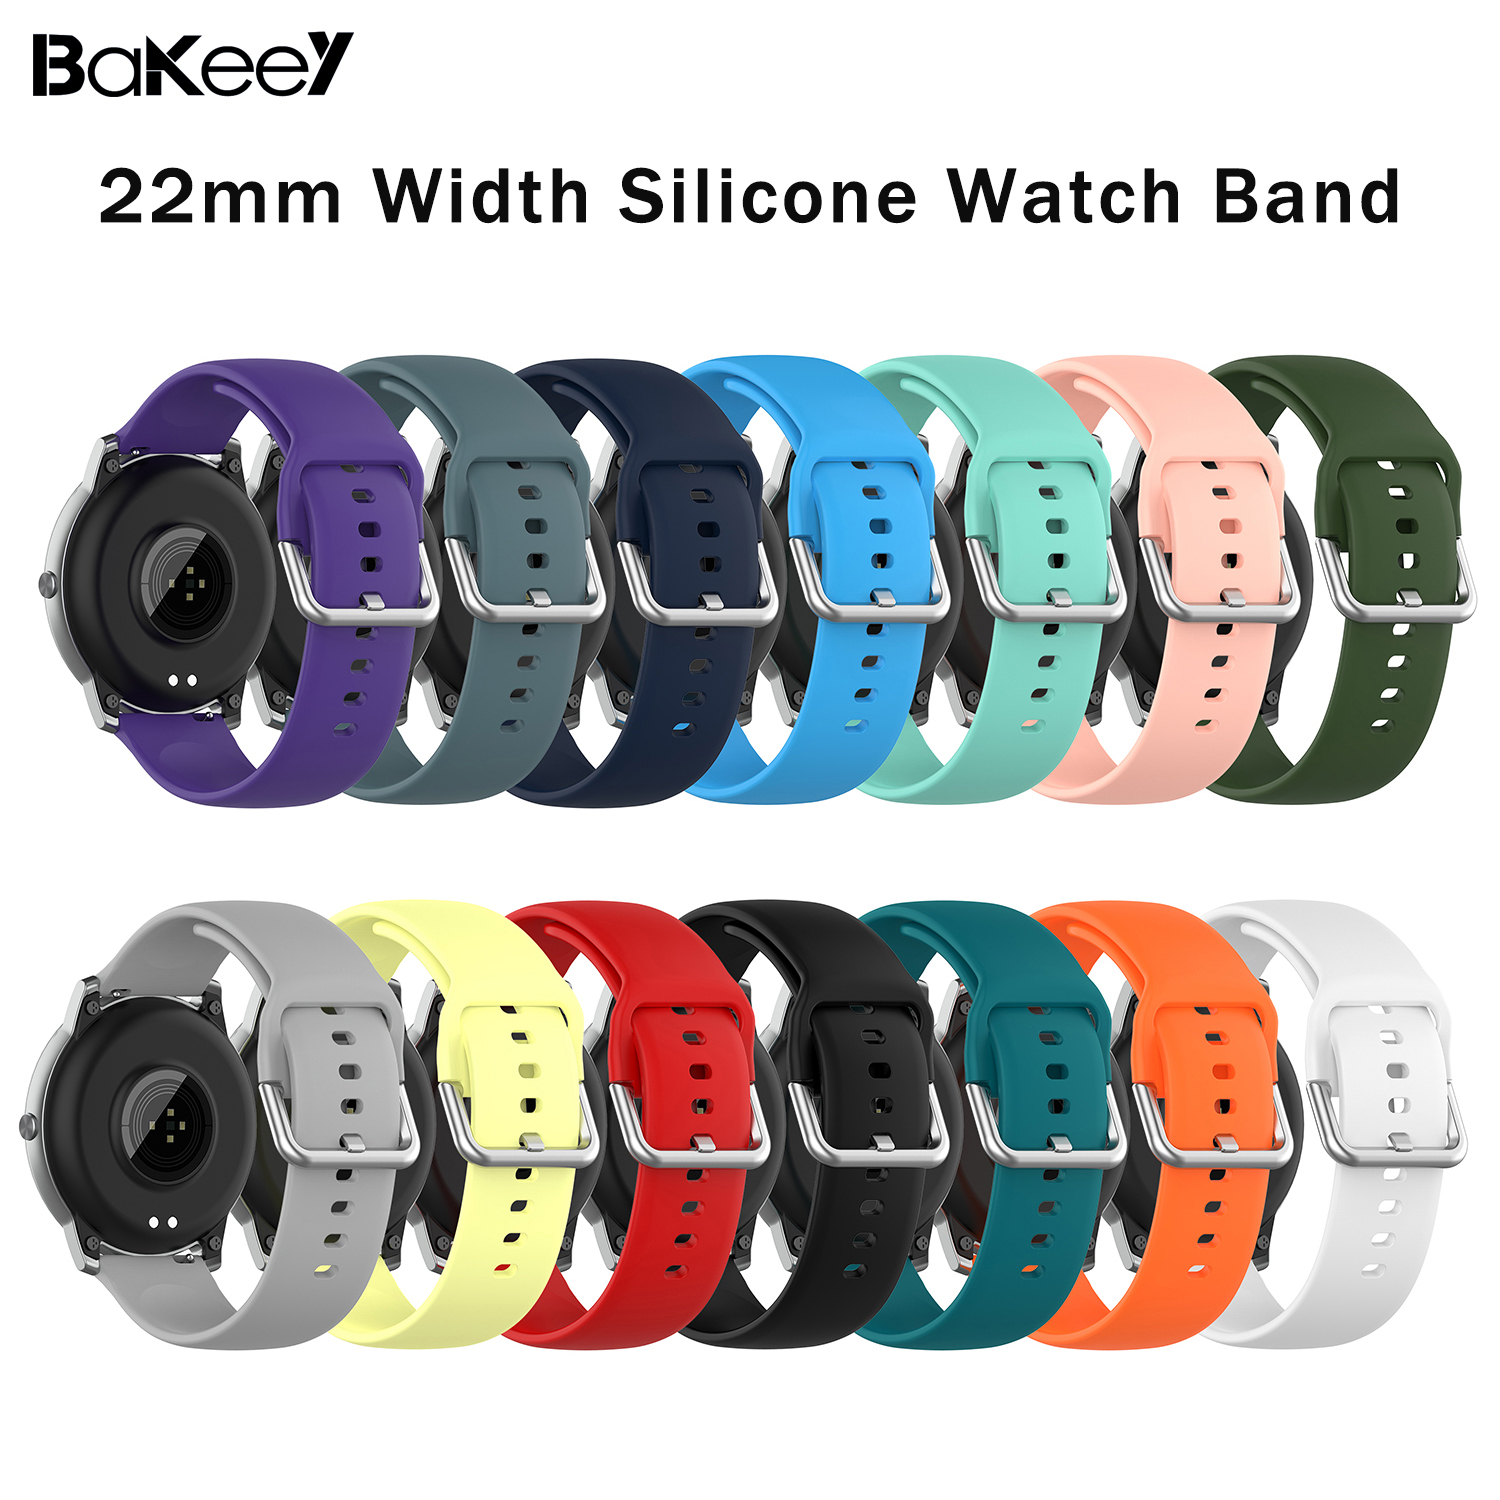 Bakeey-22mm-Width-Universal-Pure-Sport-Soft-Silicone-Watch-Band-Strap-Replacement-for-Samsung-Galaxy-1731525-1